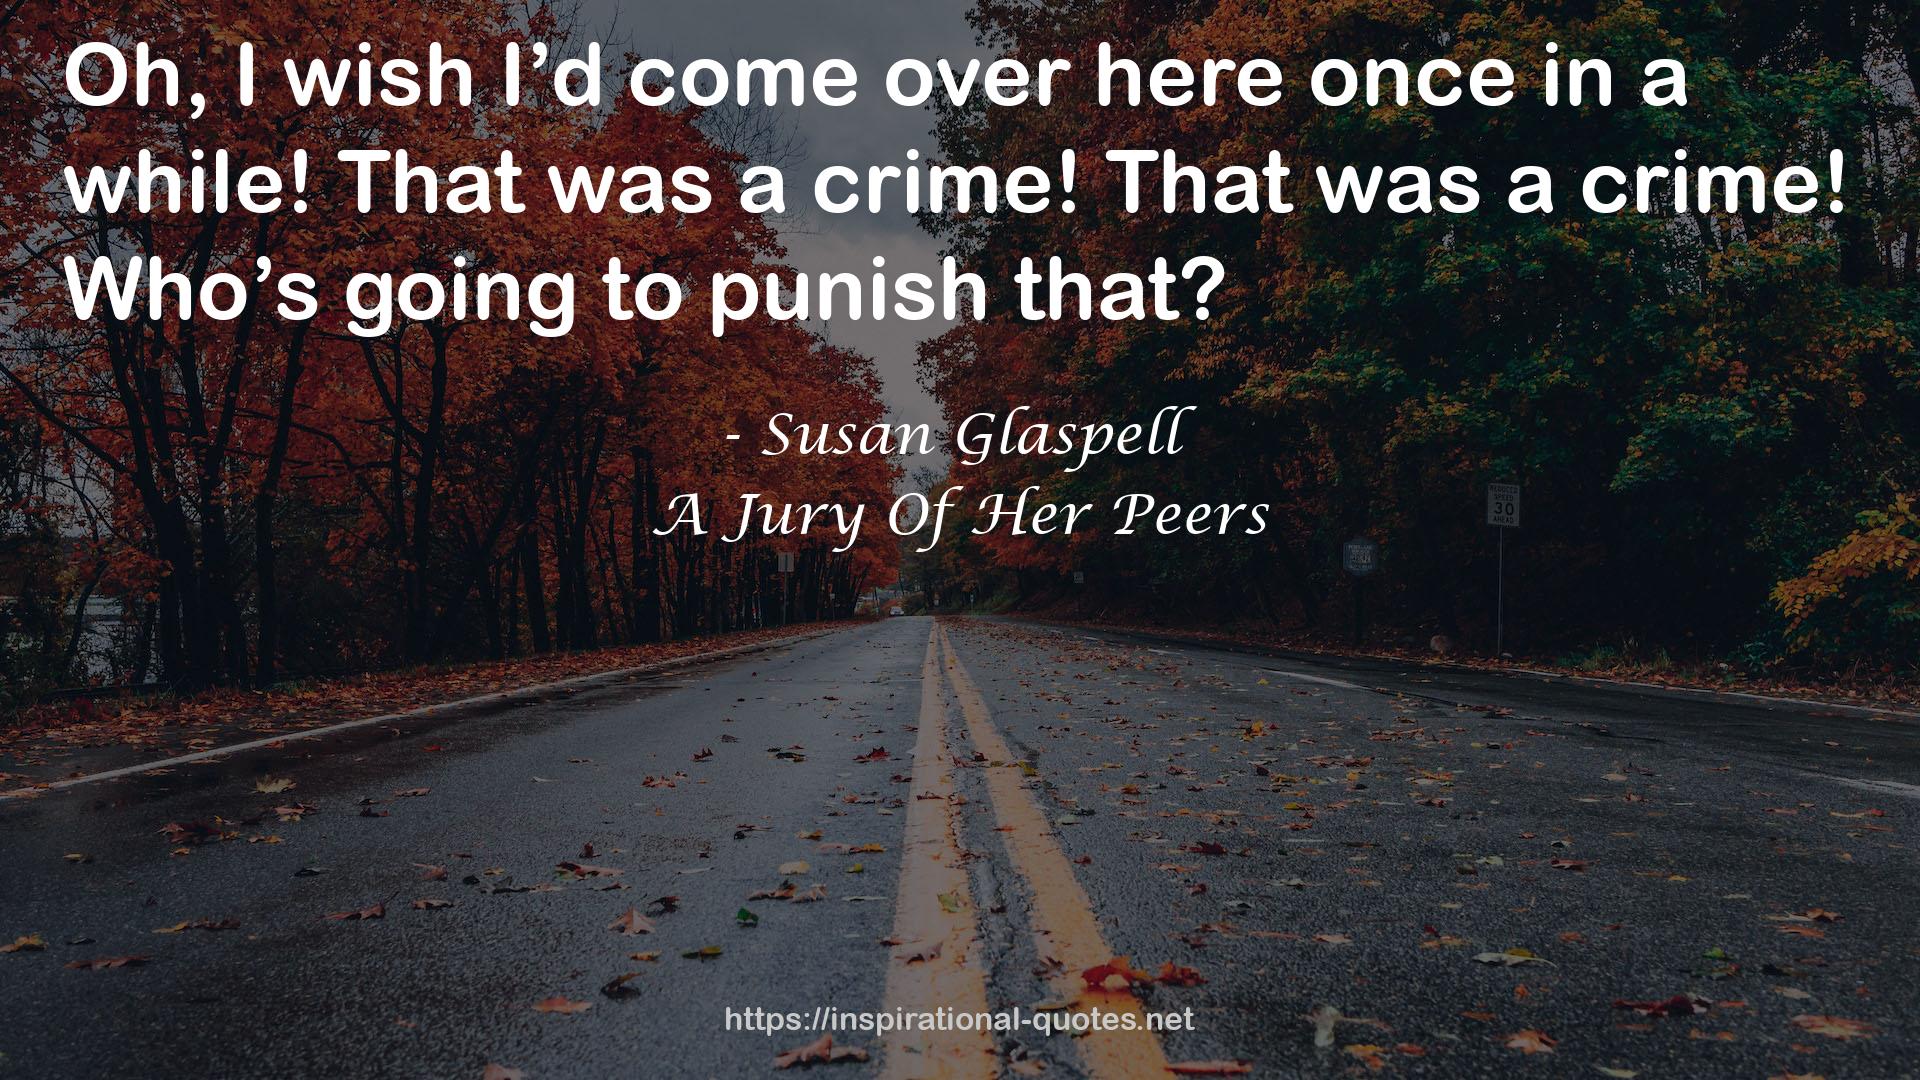 Susan Glaspell QUOTES